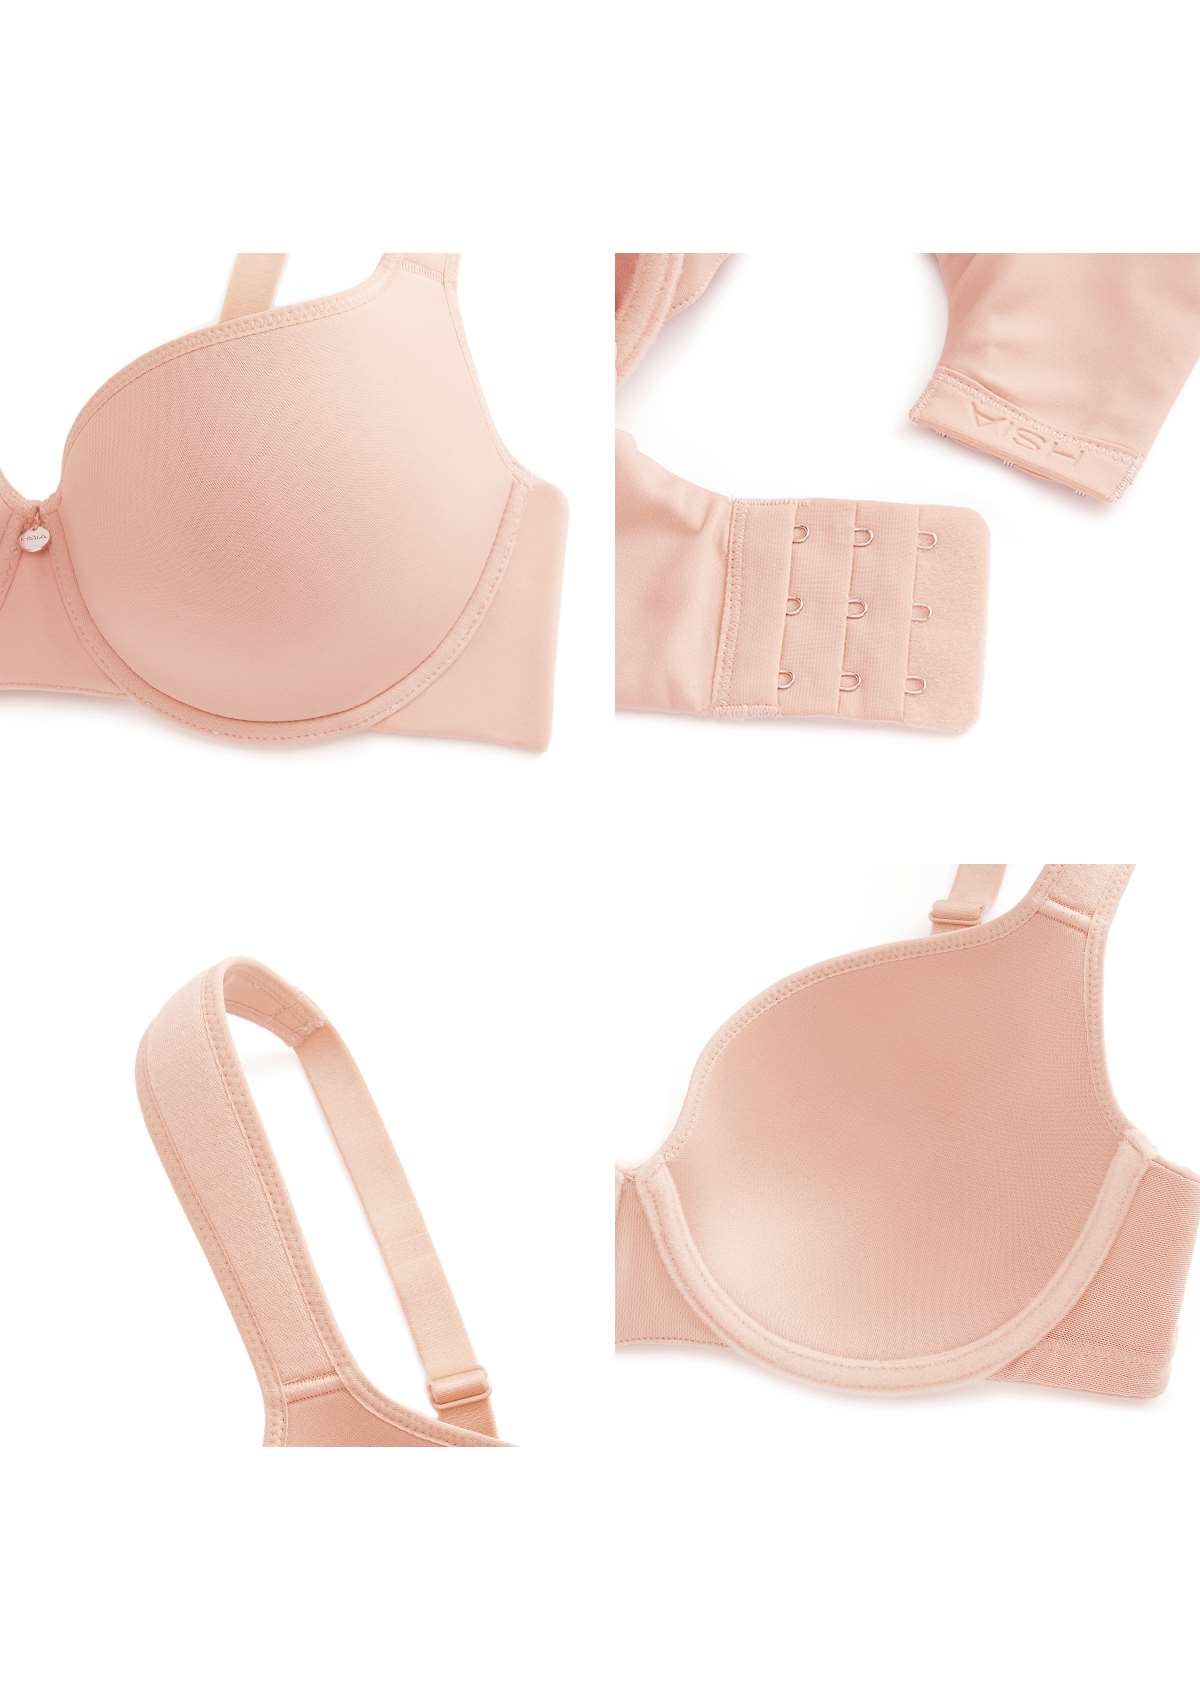 HSIA Patricia Smooth Classic T-shirt Lightly Padded Minimizer Bra - Light Pink / 44 / G